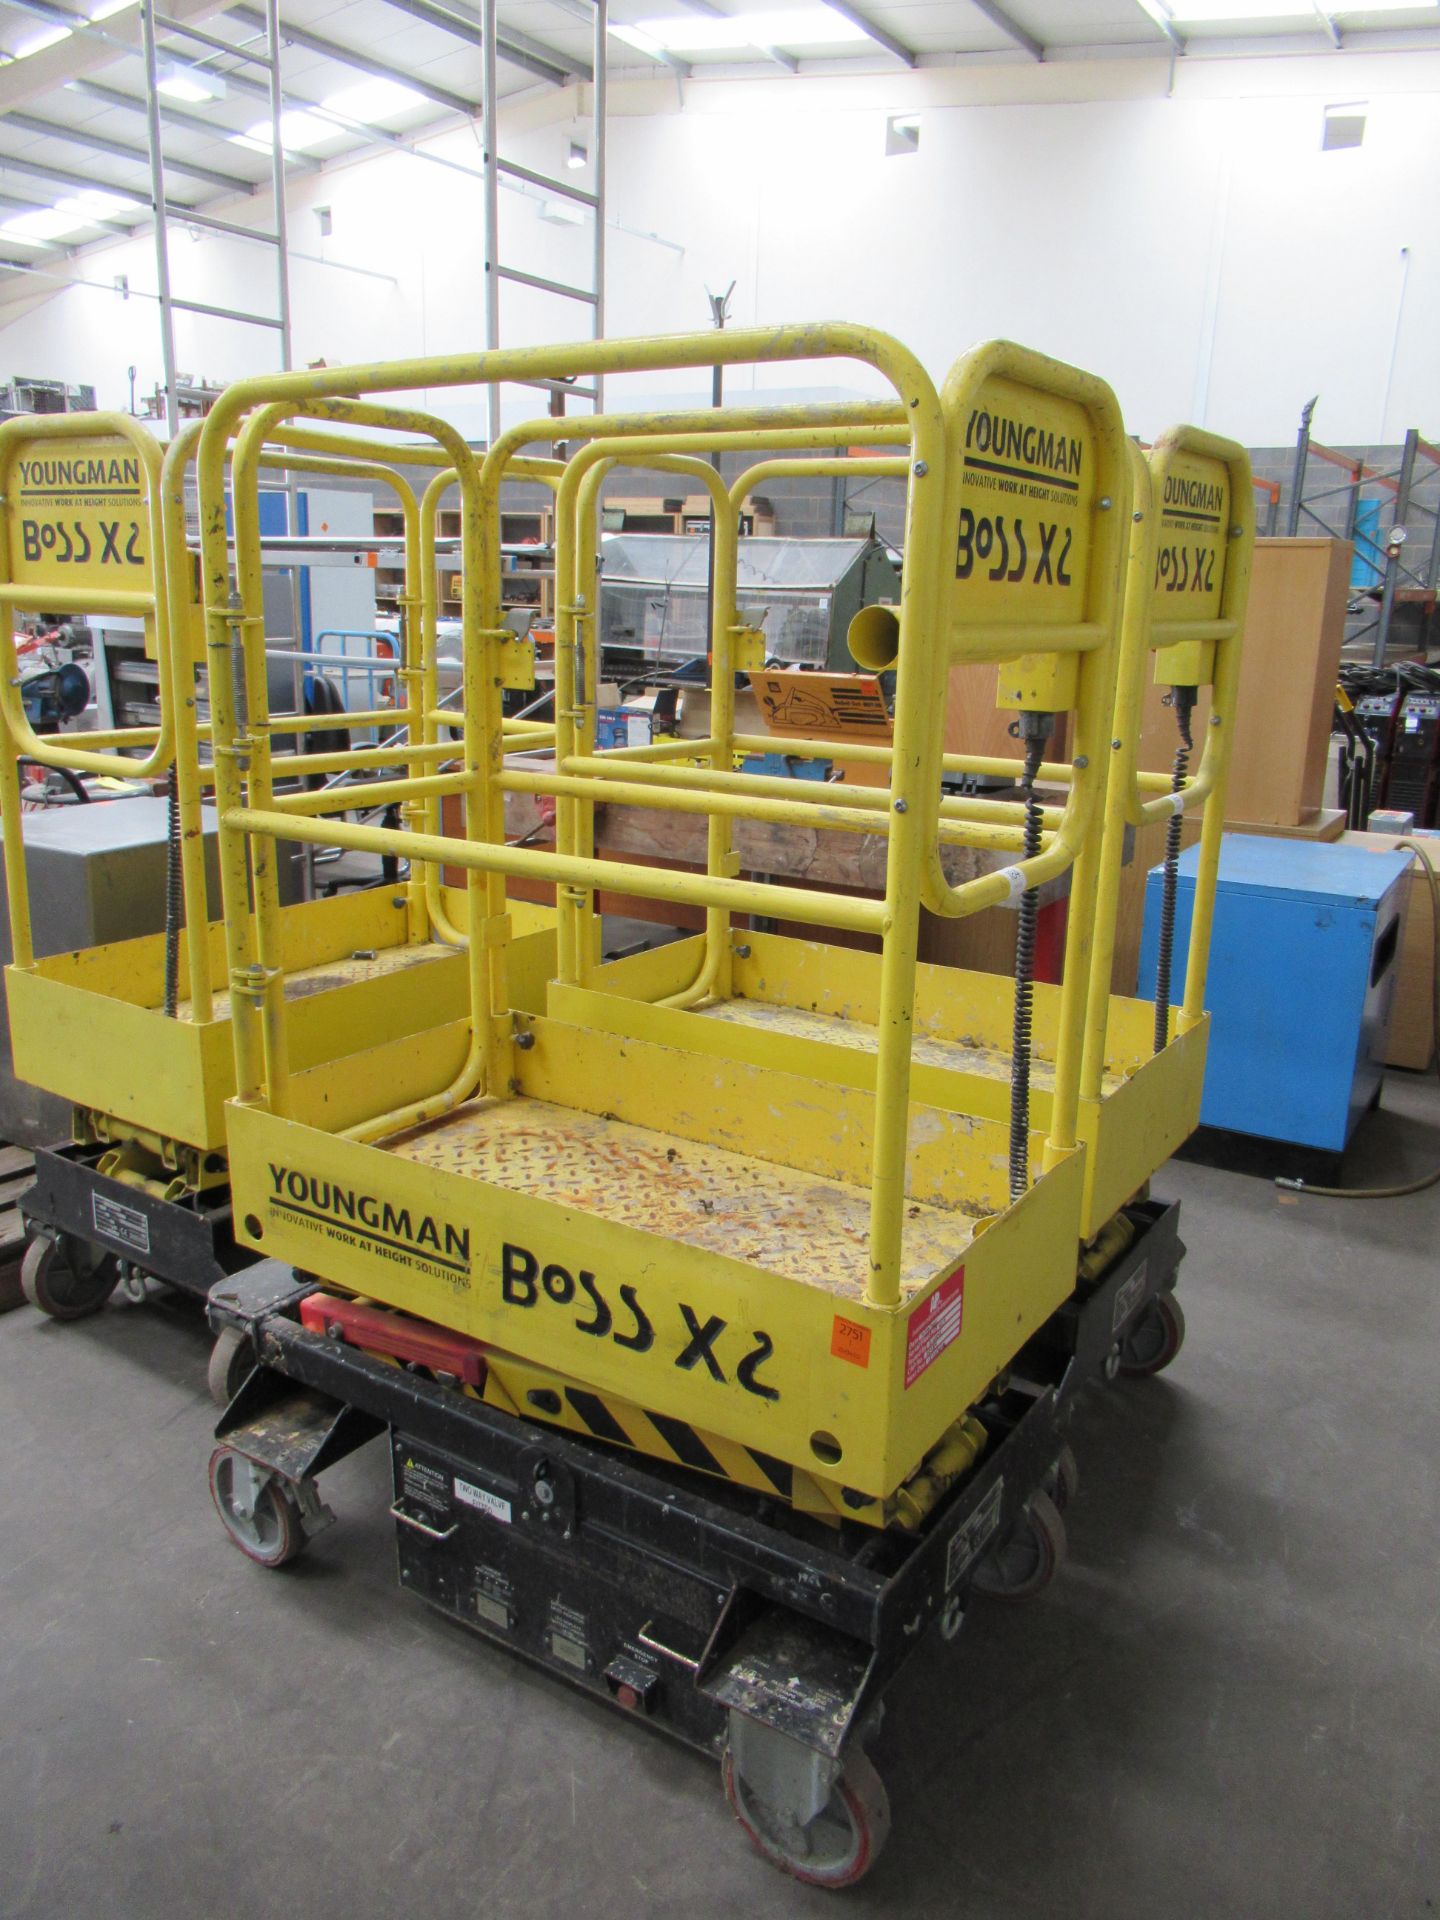 A Youngman Boss X2 Scissor Lift S/N 21017 YOM 2010. Please note there is a £10 plus VAT Lift out fee